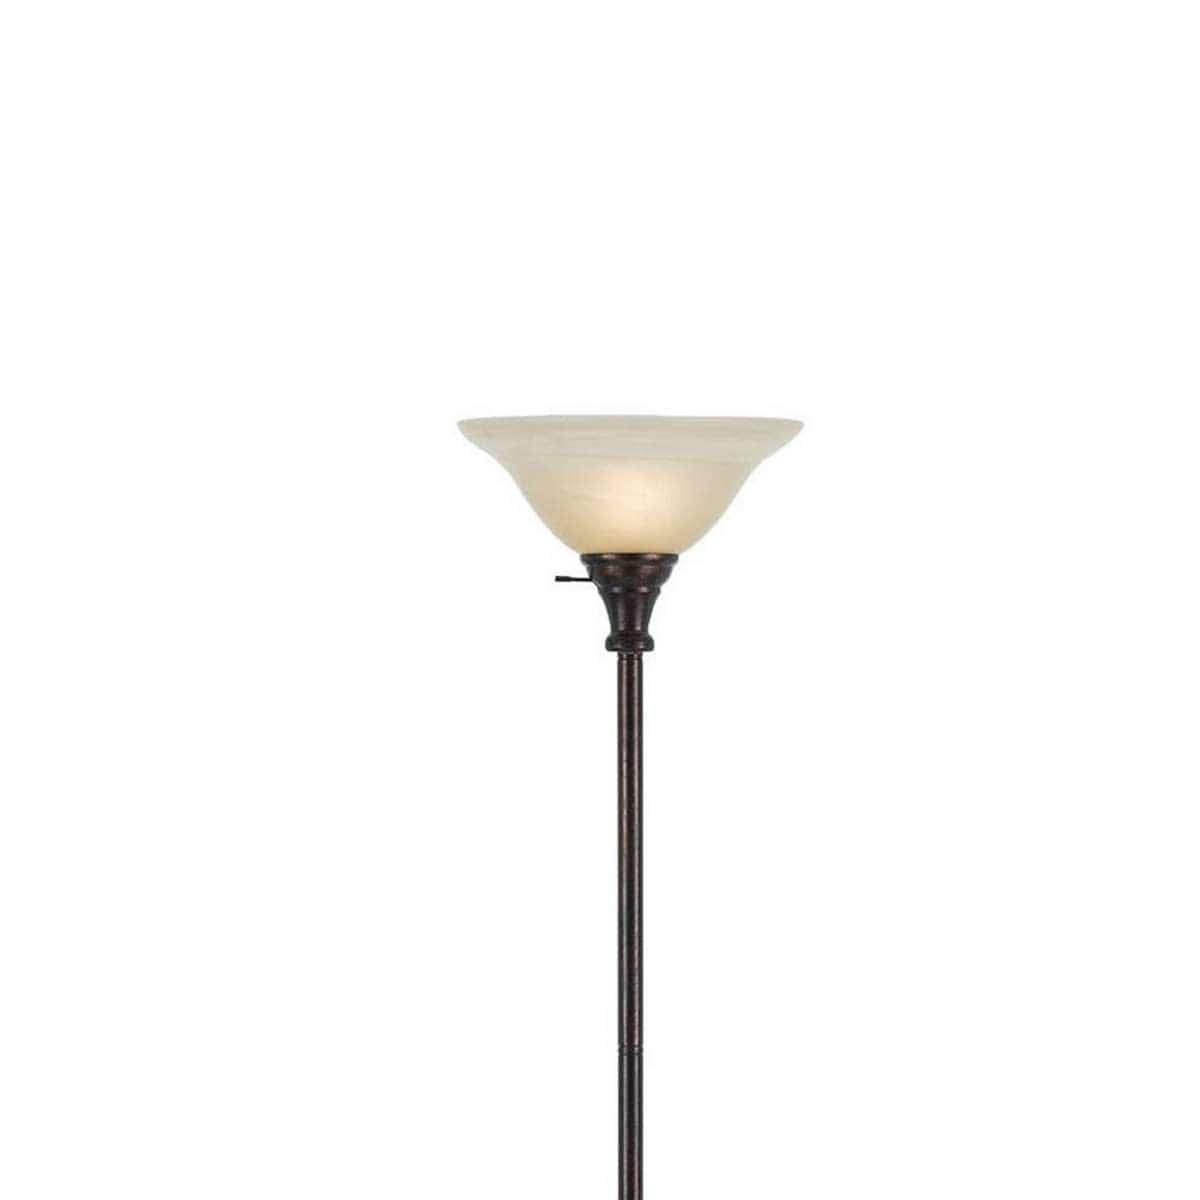 Benzara Metal Round 3 Way Torchiere Lamp With Frosted Glass Shade, Bronze And Gold By Benzara Floor Lamps BM225119